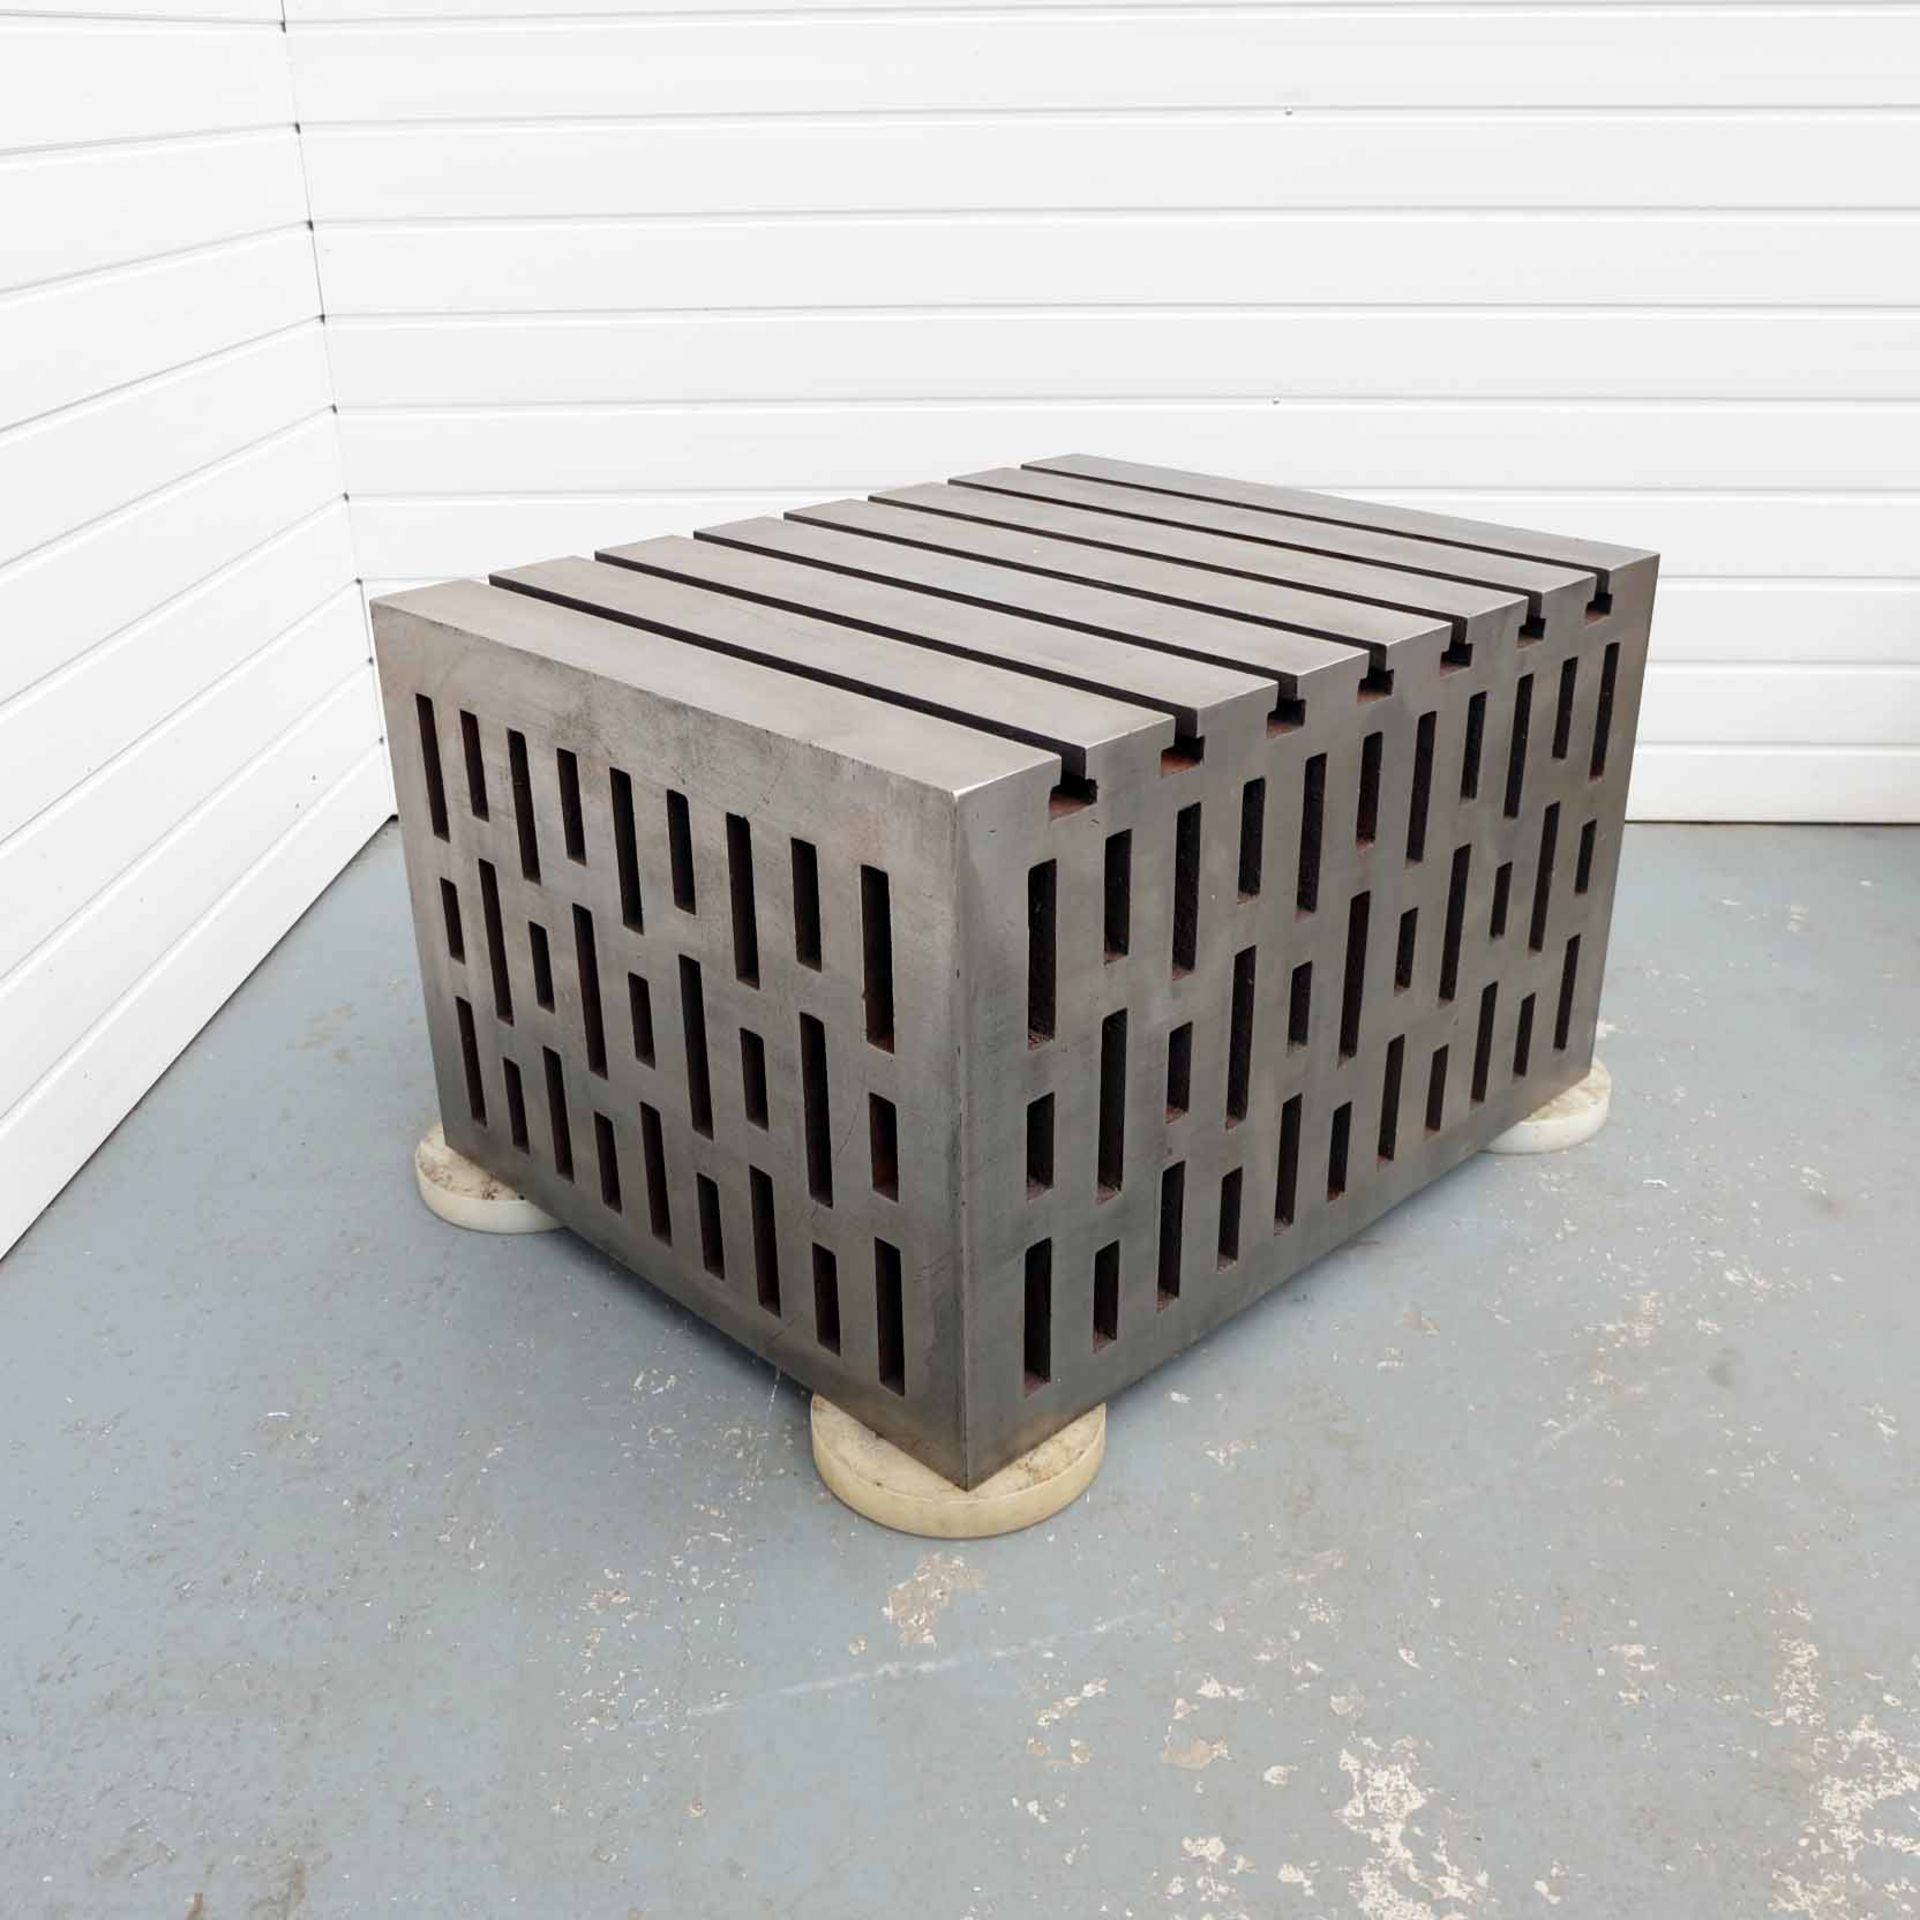 Tee Slotted Cube. Size 30" x 24" x 18". Tee Slotted on 30" x 24" Side. - Bild 3 aus 6